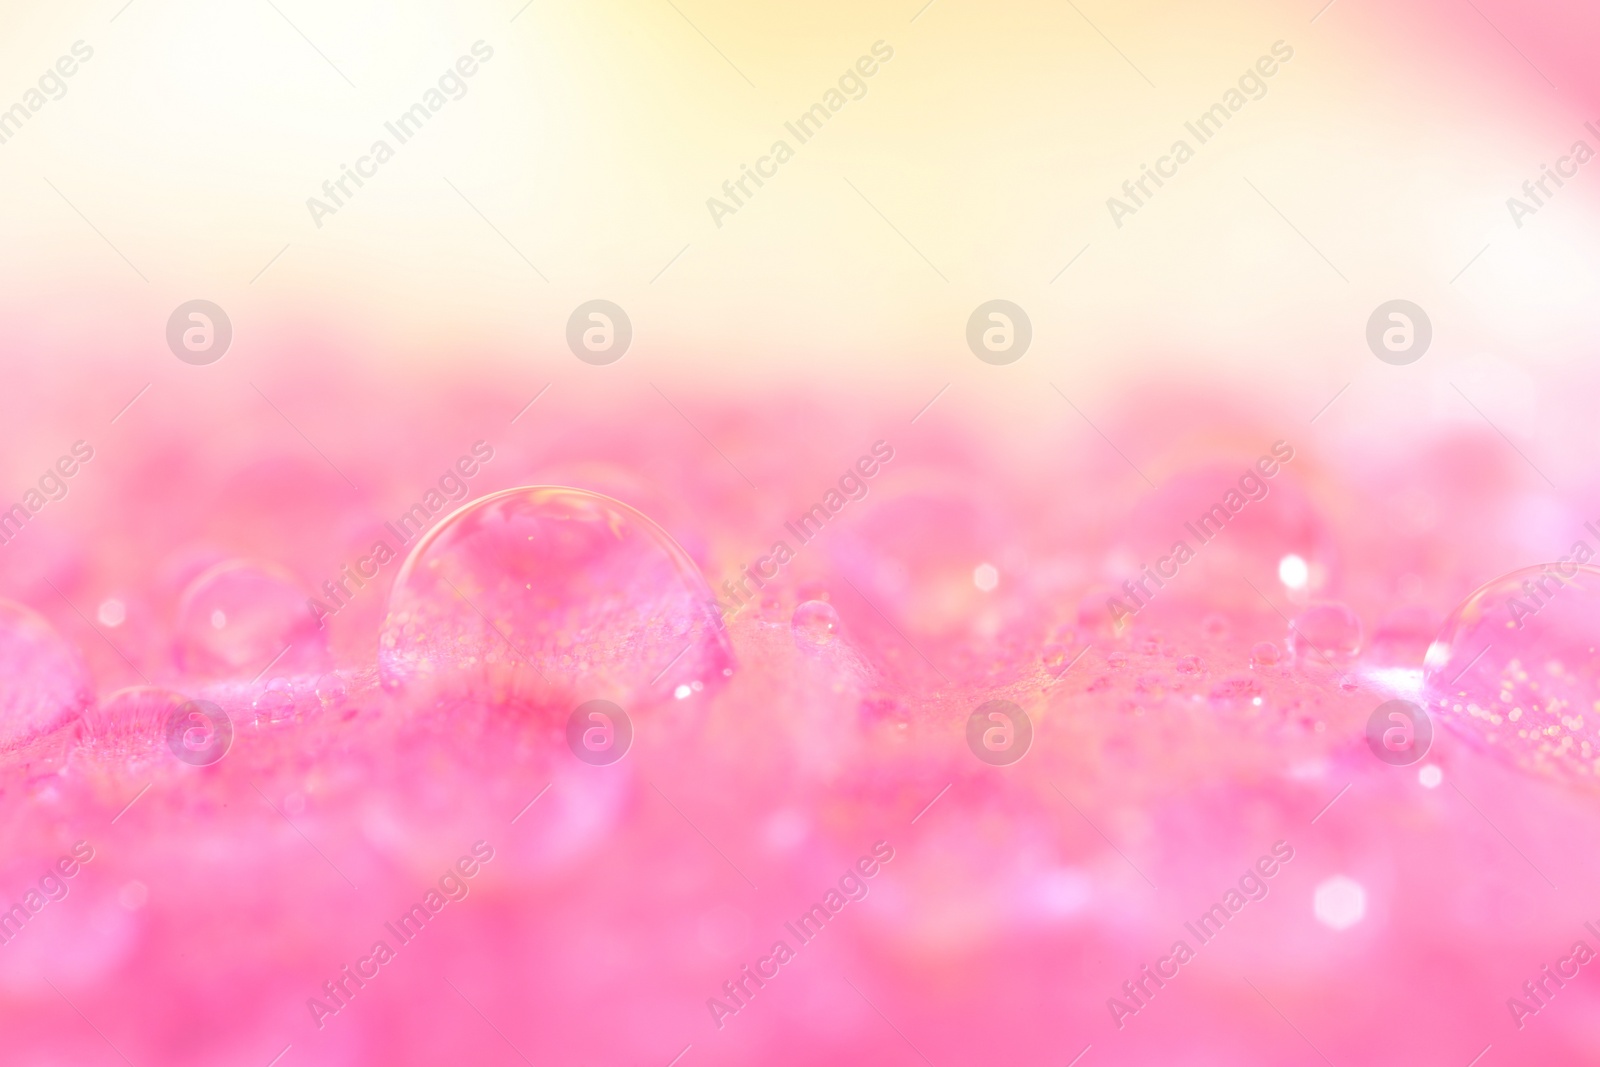 Photo of Beautiful flower with water drops on blurred background, macro view